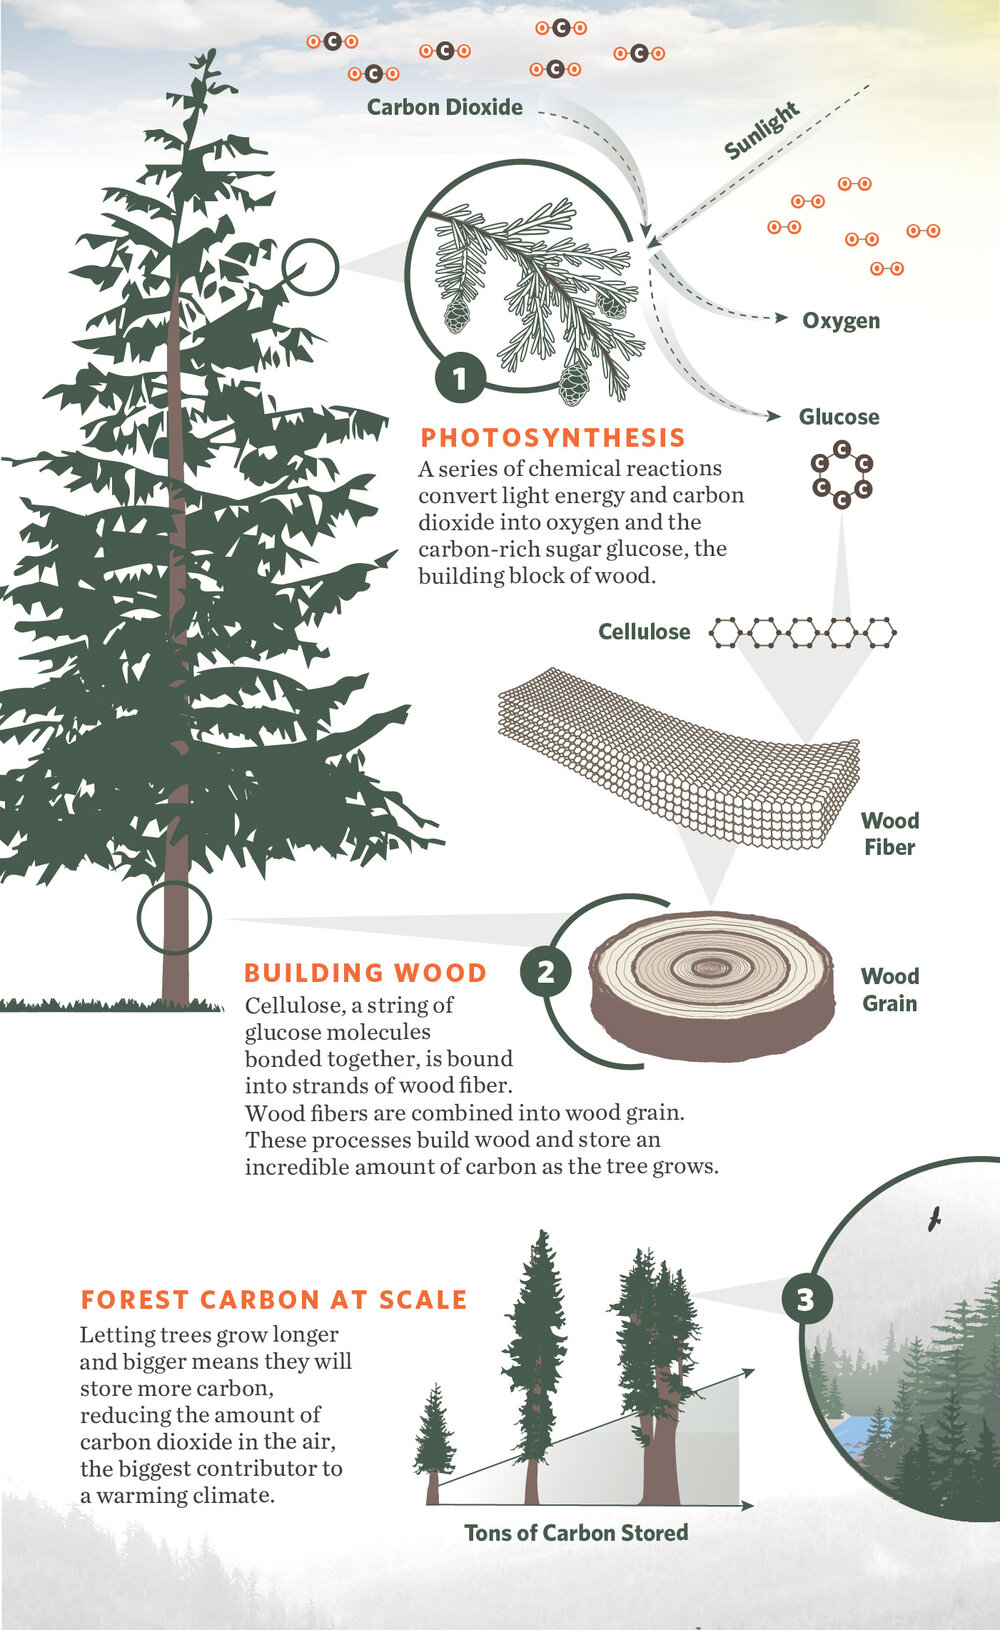 How trees capture and store carbon dioxide (in aboveground biomass – leaves, stems and trunks). Infographic: TNC/Erica Simek Sloniker